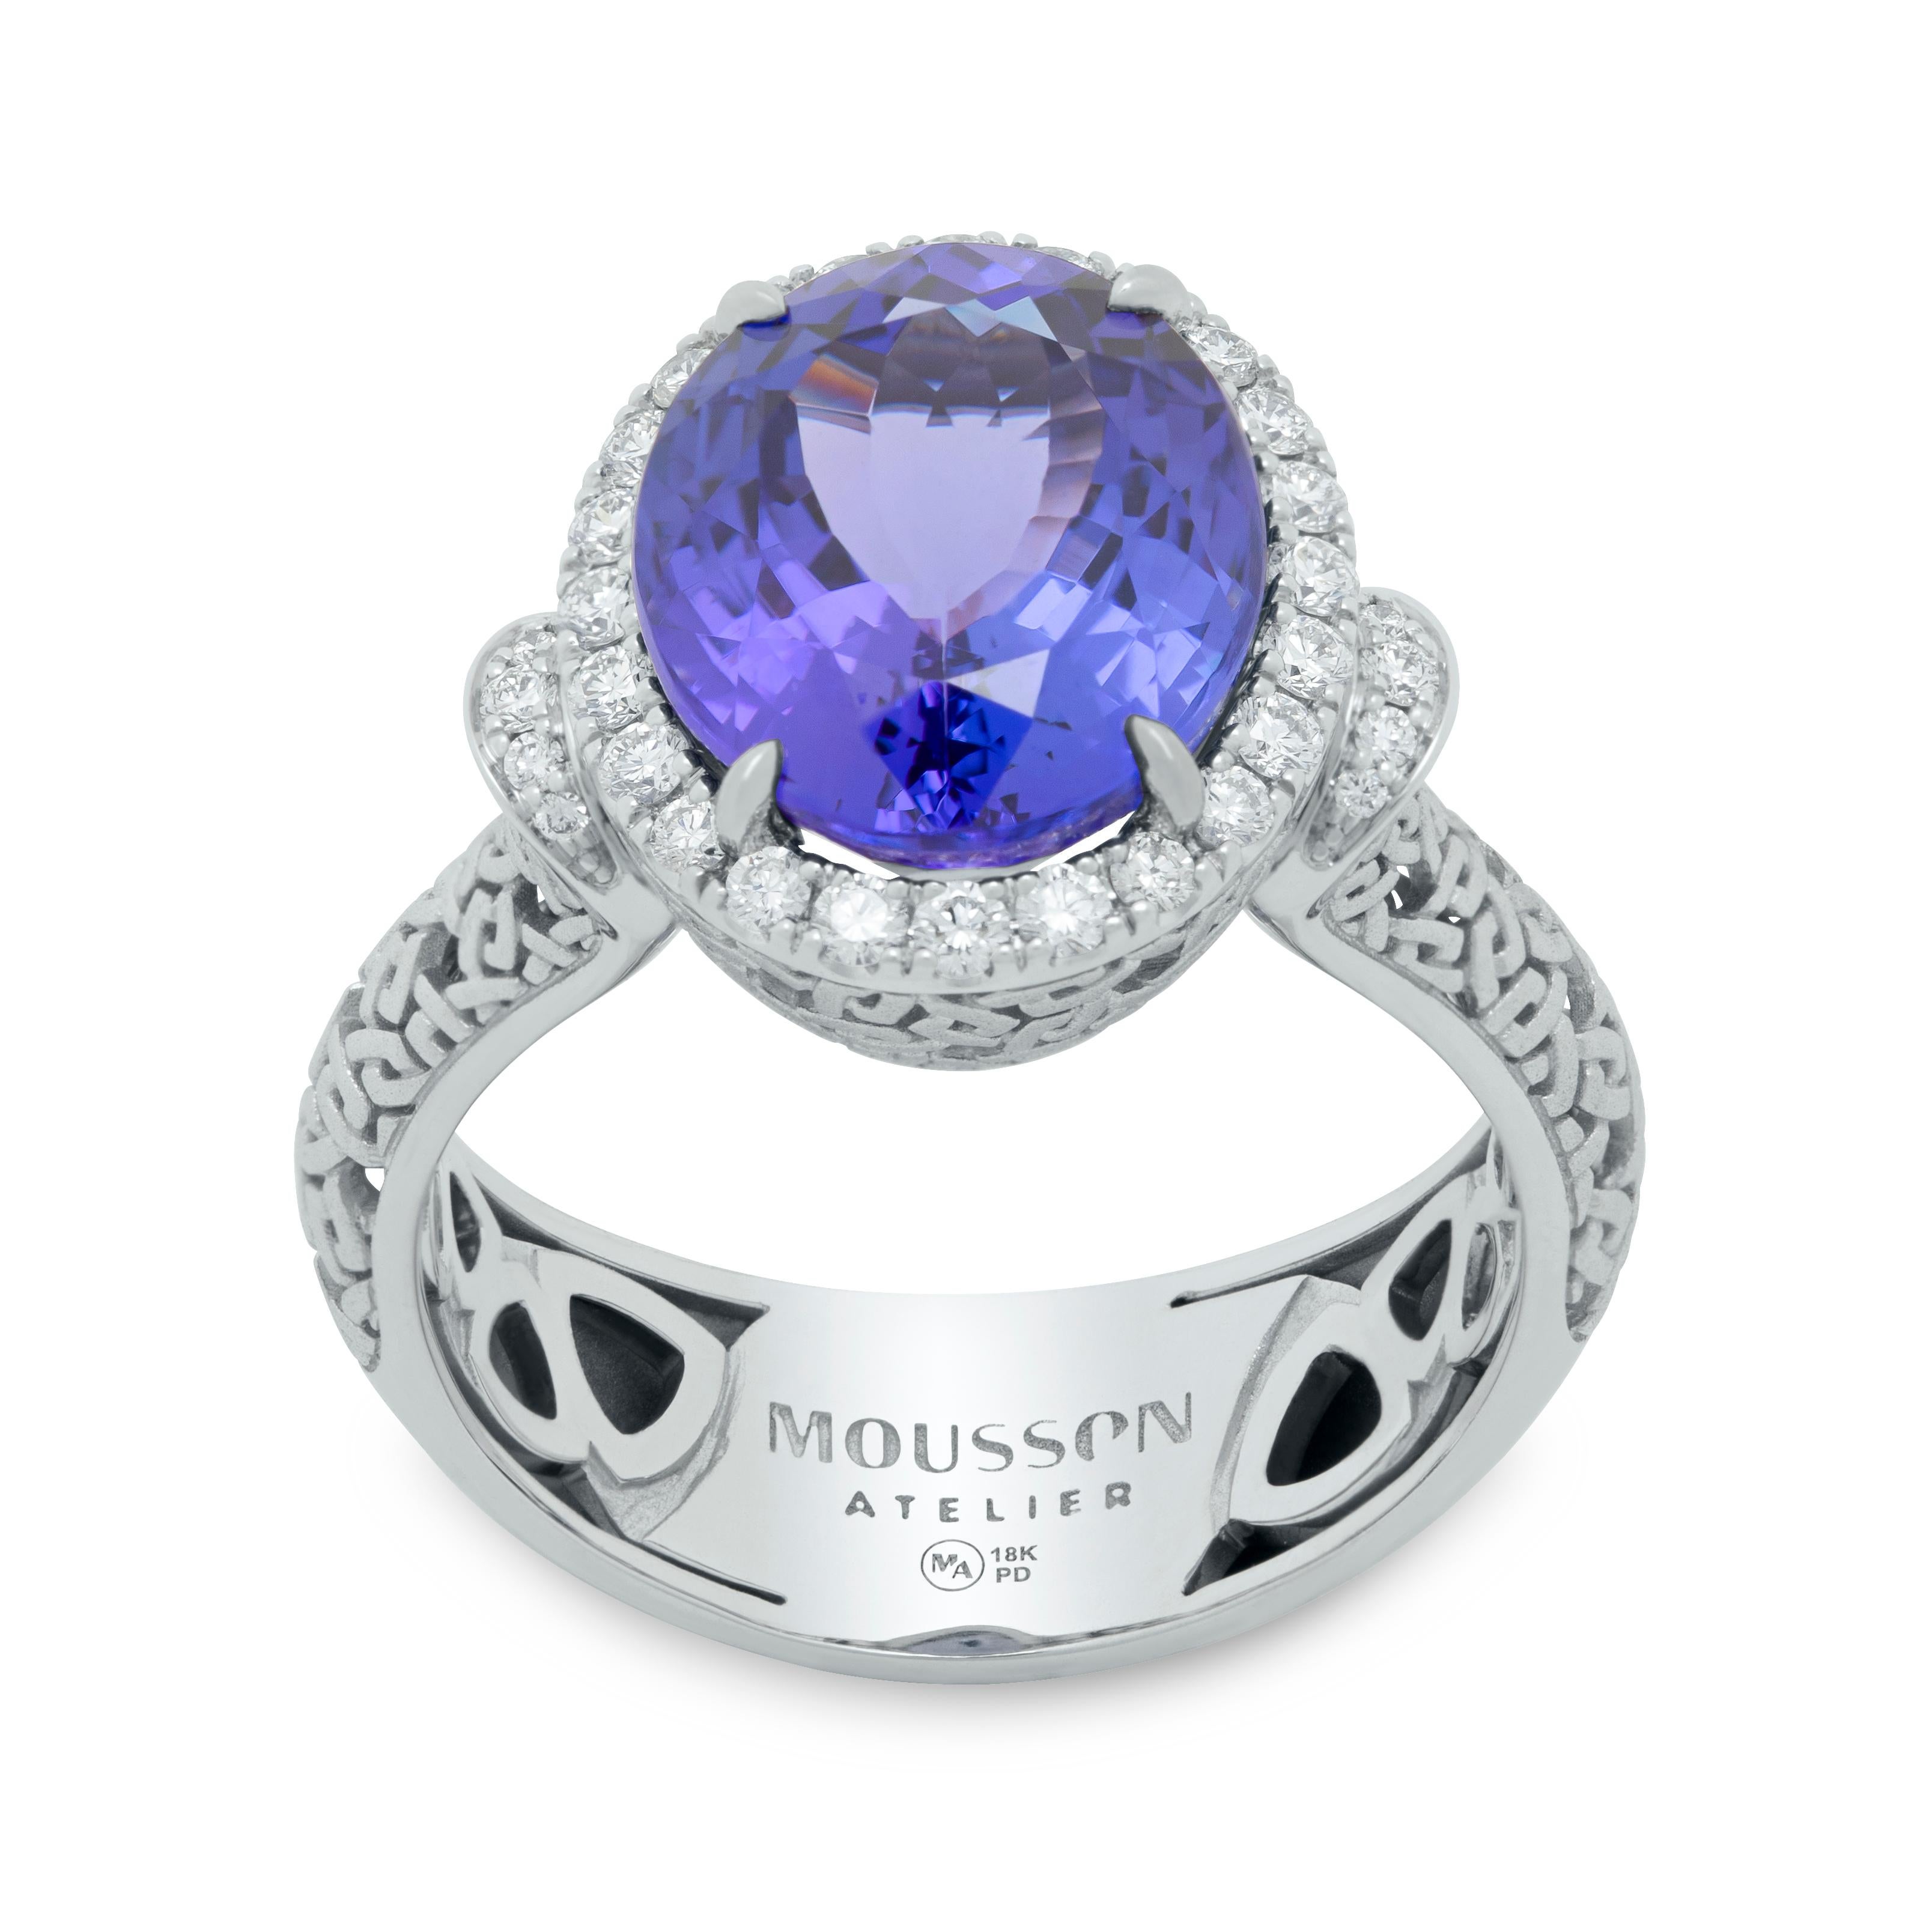 Tanzanites Diamonds 18 Karat White Gold New Classic Suite
Introducing a Suite crafted from delicate 18 Karat White Gold, which in company with Tanzanites and Diamonds around it, creates a truly noble look. But the main detail here is still the